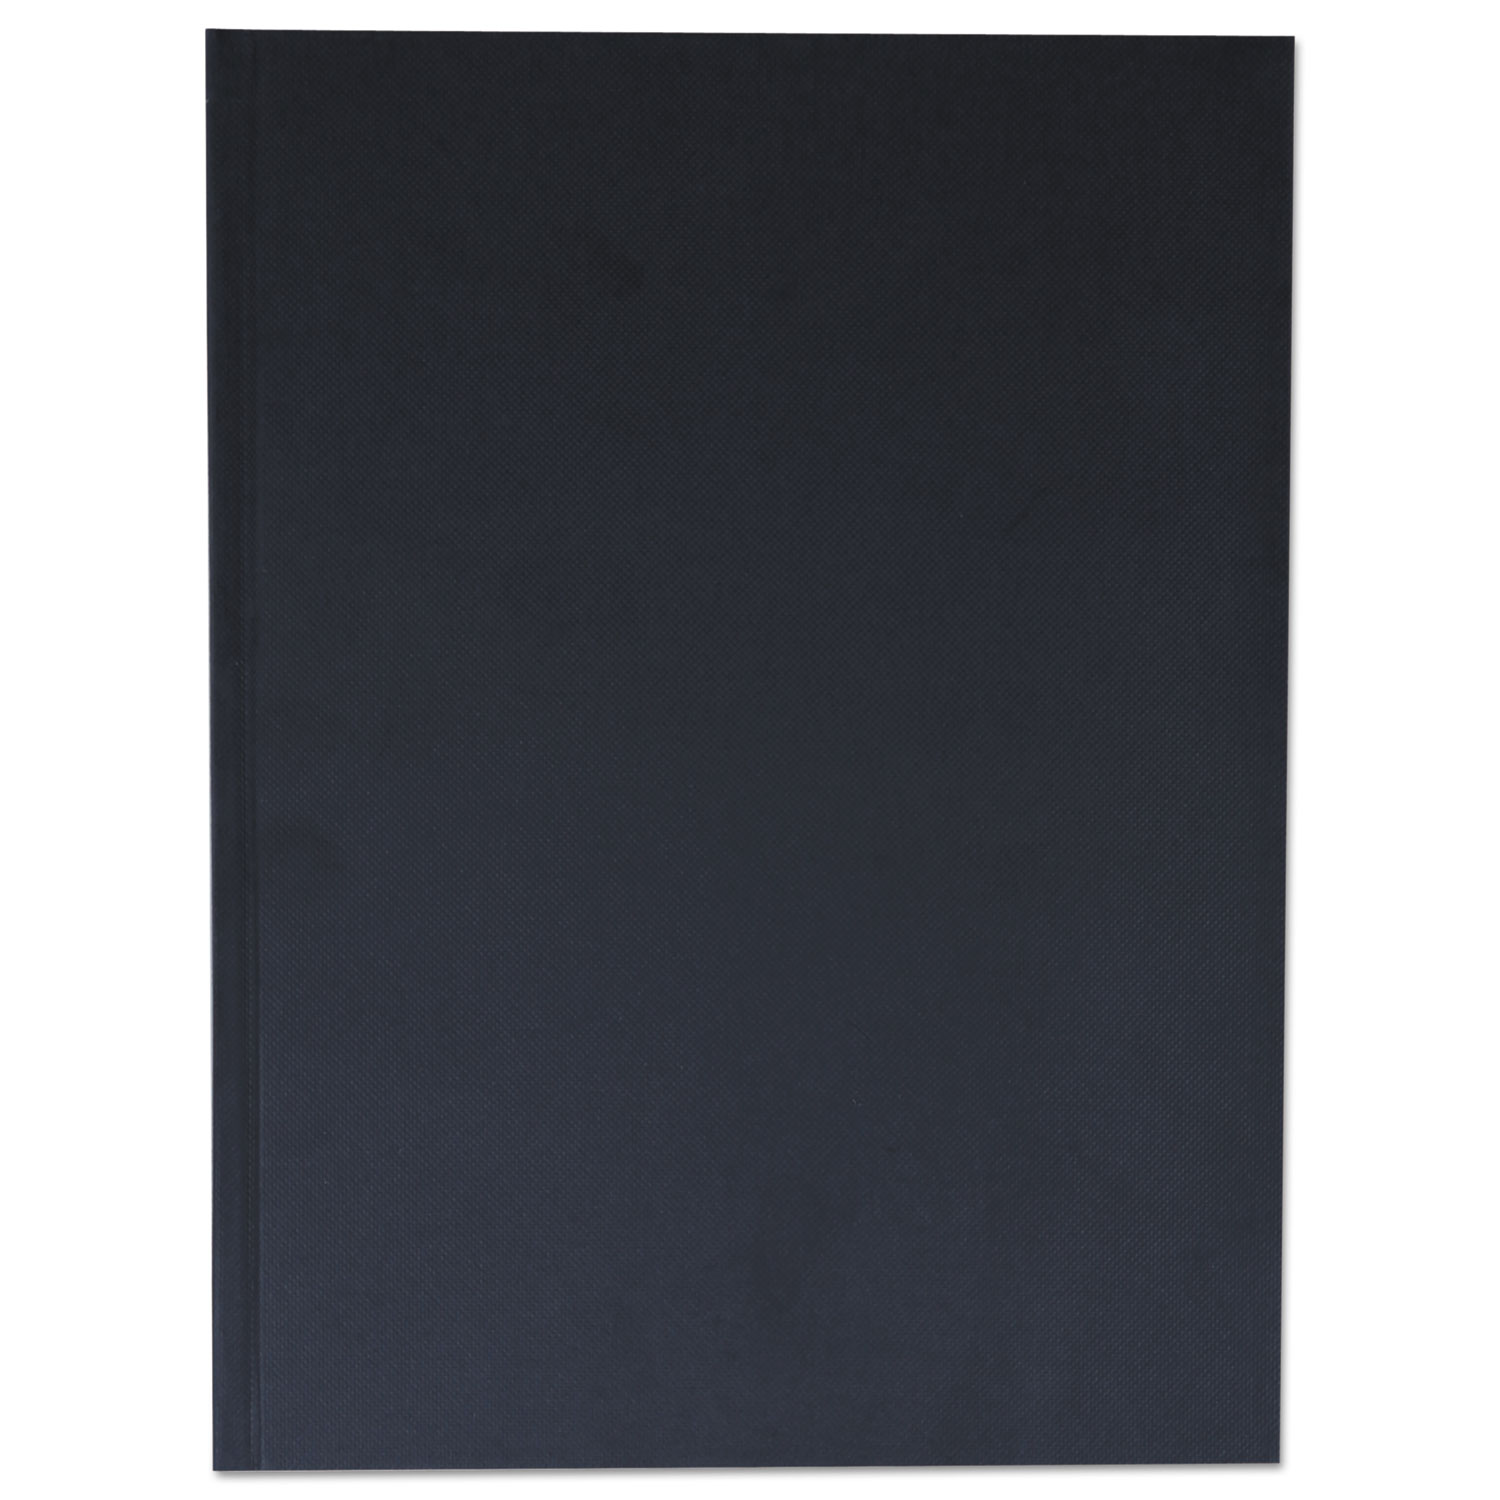  Universal UNV66353 Casebound Hardcover Notebook, Wide/Legal Rule, Black Cover, 10.25 x 7.68, 150 Sheets (UNV66353) 